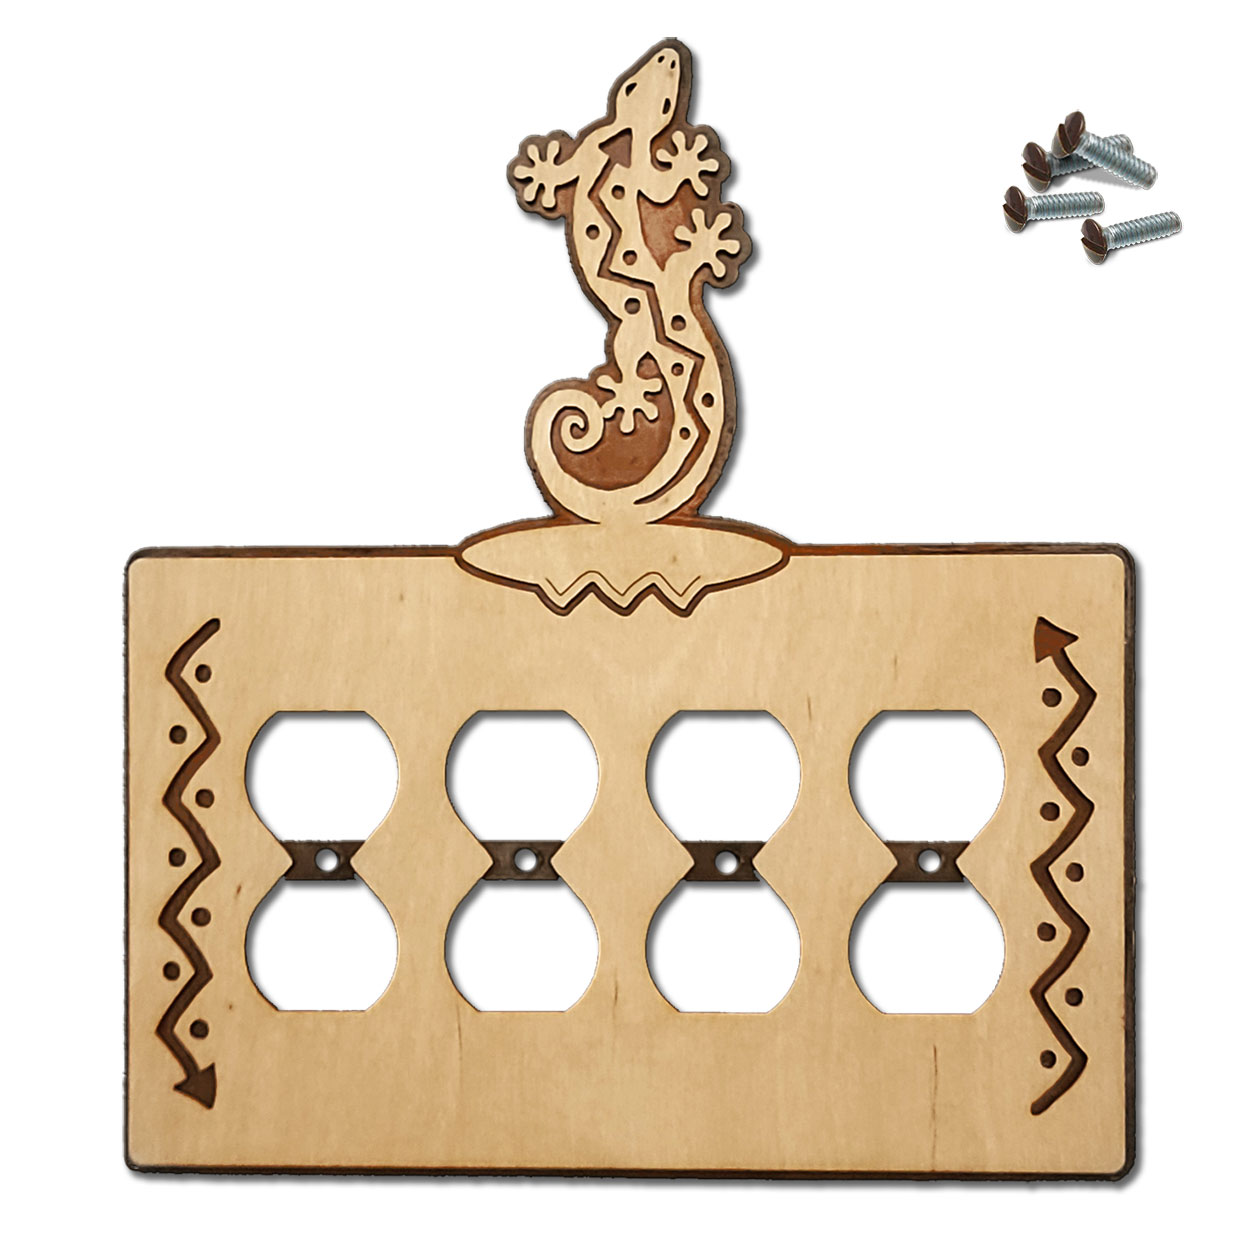 168017 -  Climbing Gecko Southwestern Decor Quad Outlet Cover in Natural Birch